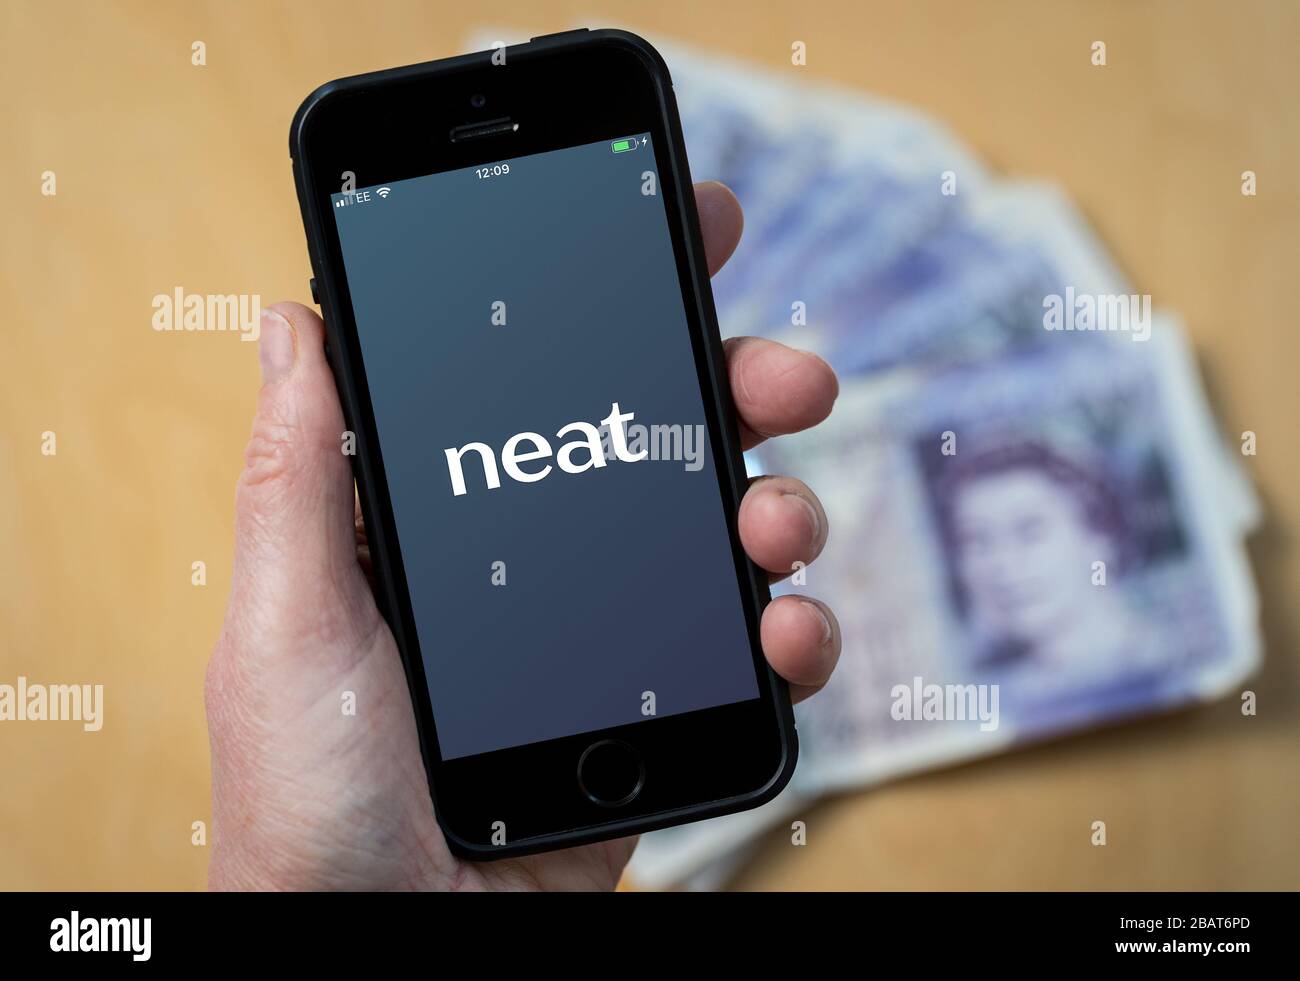 A woman using the neat accounting app on a mobile phone. (Editorial Use Only) Stock Photo